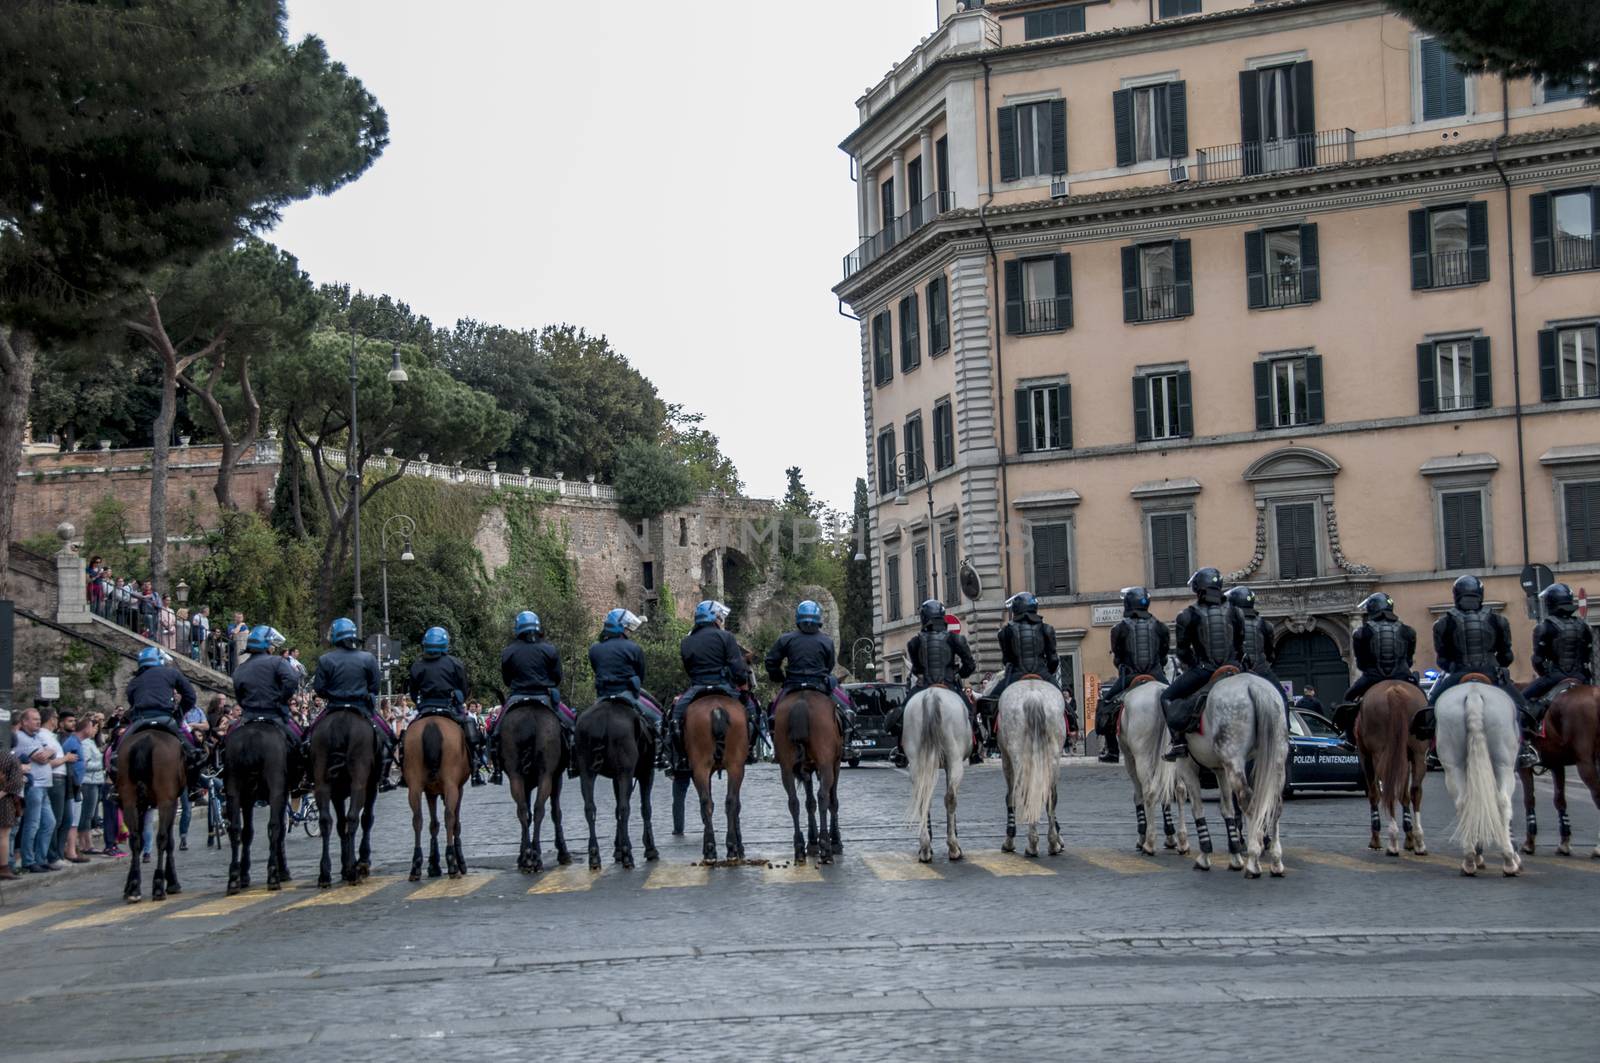 ITALY, Rome: Policemen face protesters during a demonstration, called by the Movements for the Right to Housing, to protest against forced housing evictions and to ask for the right to housing in Rome, Italy on April 16, 2016. Thousands of 'Housing Rights' activists took to the street in Rome to protest against forced housing evictions, to ask for the respect of accommodation right and use more public funds to help people without homes or those who cannot pay their rent.